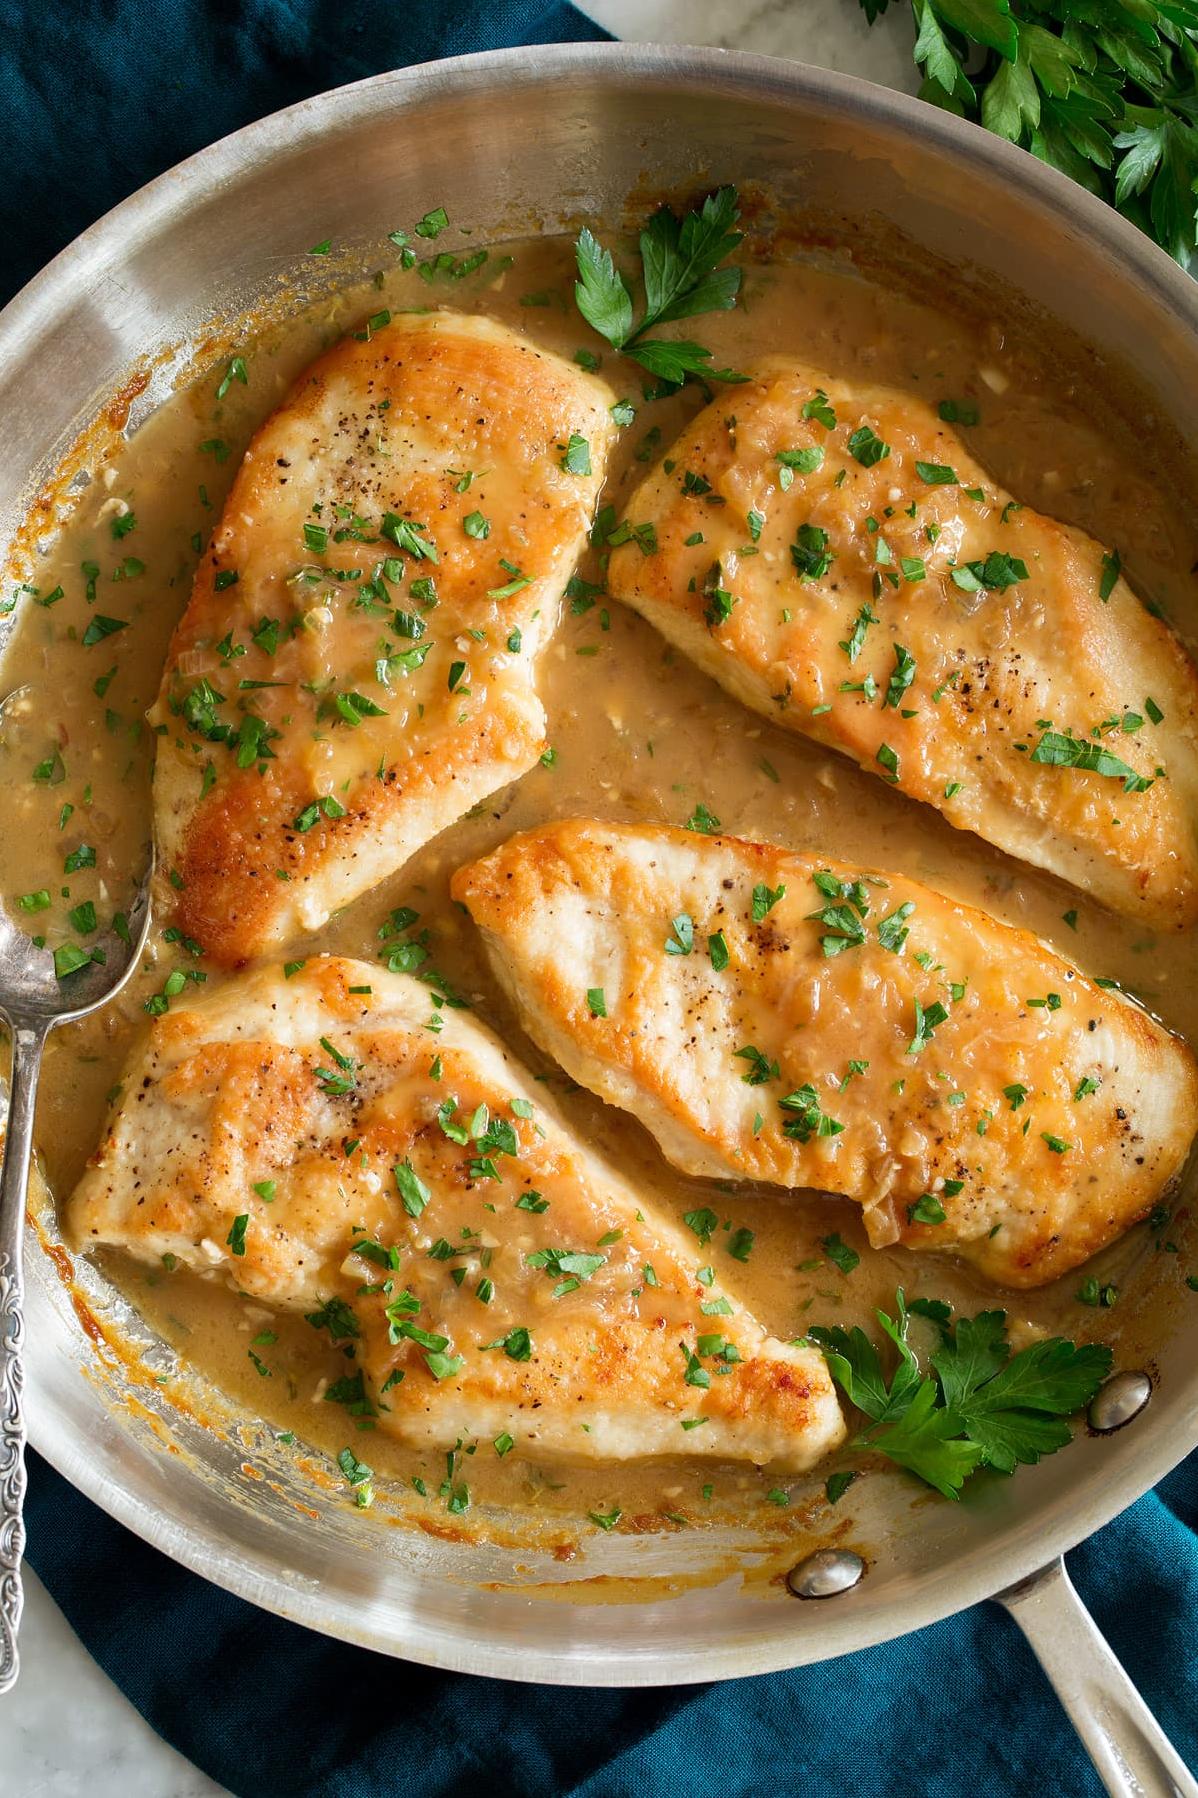  Impress your guests with this elegant meal, Chicken and Herbs in a White Wine Sauce.